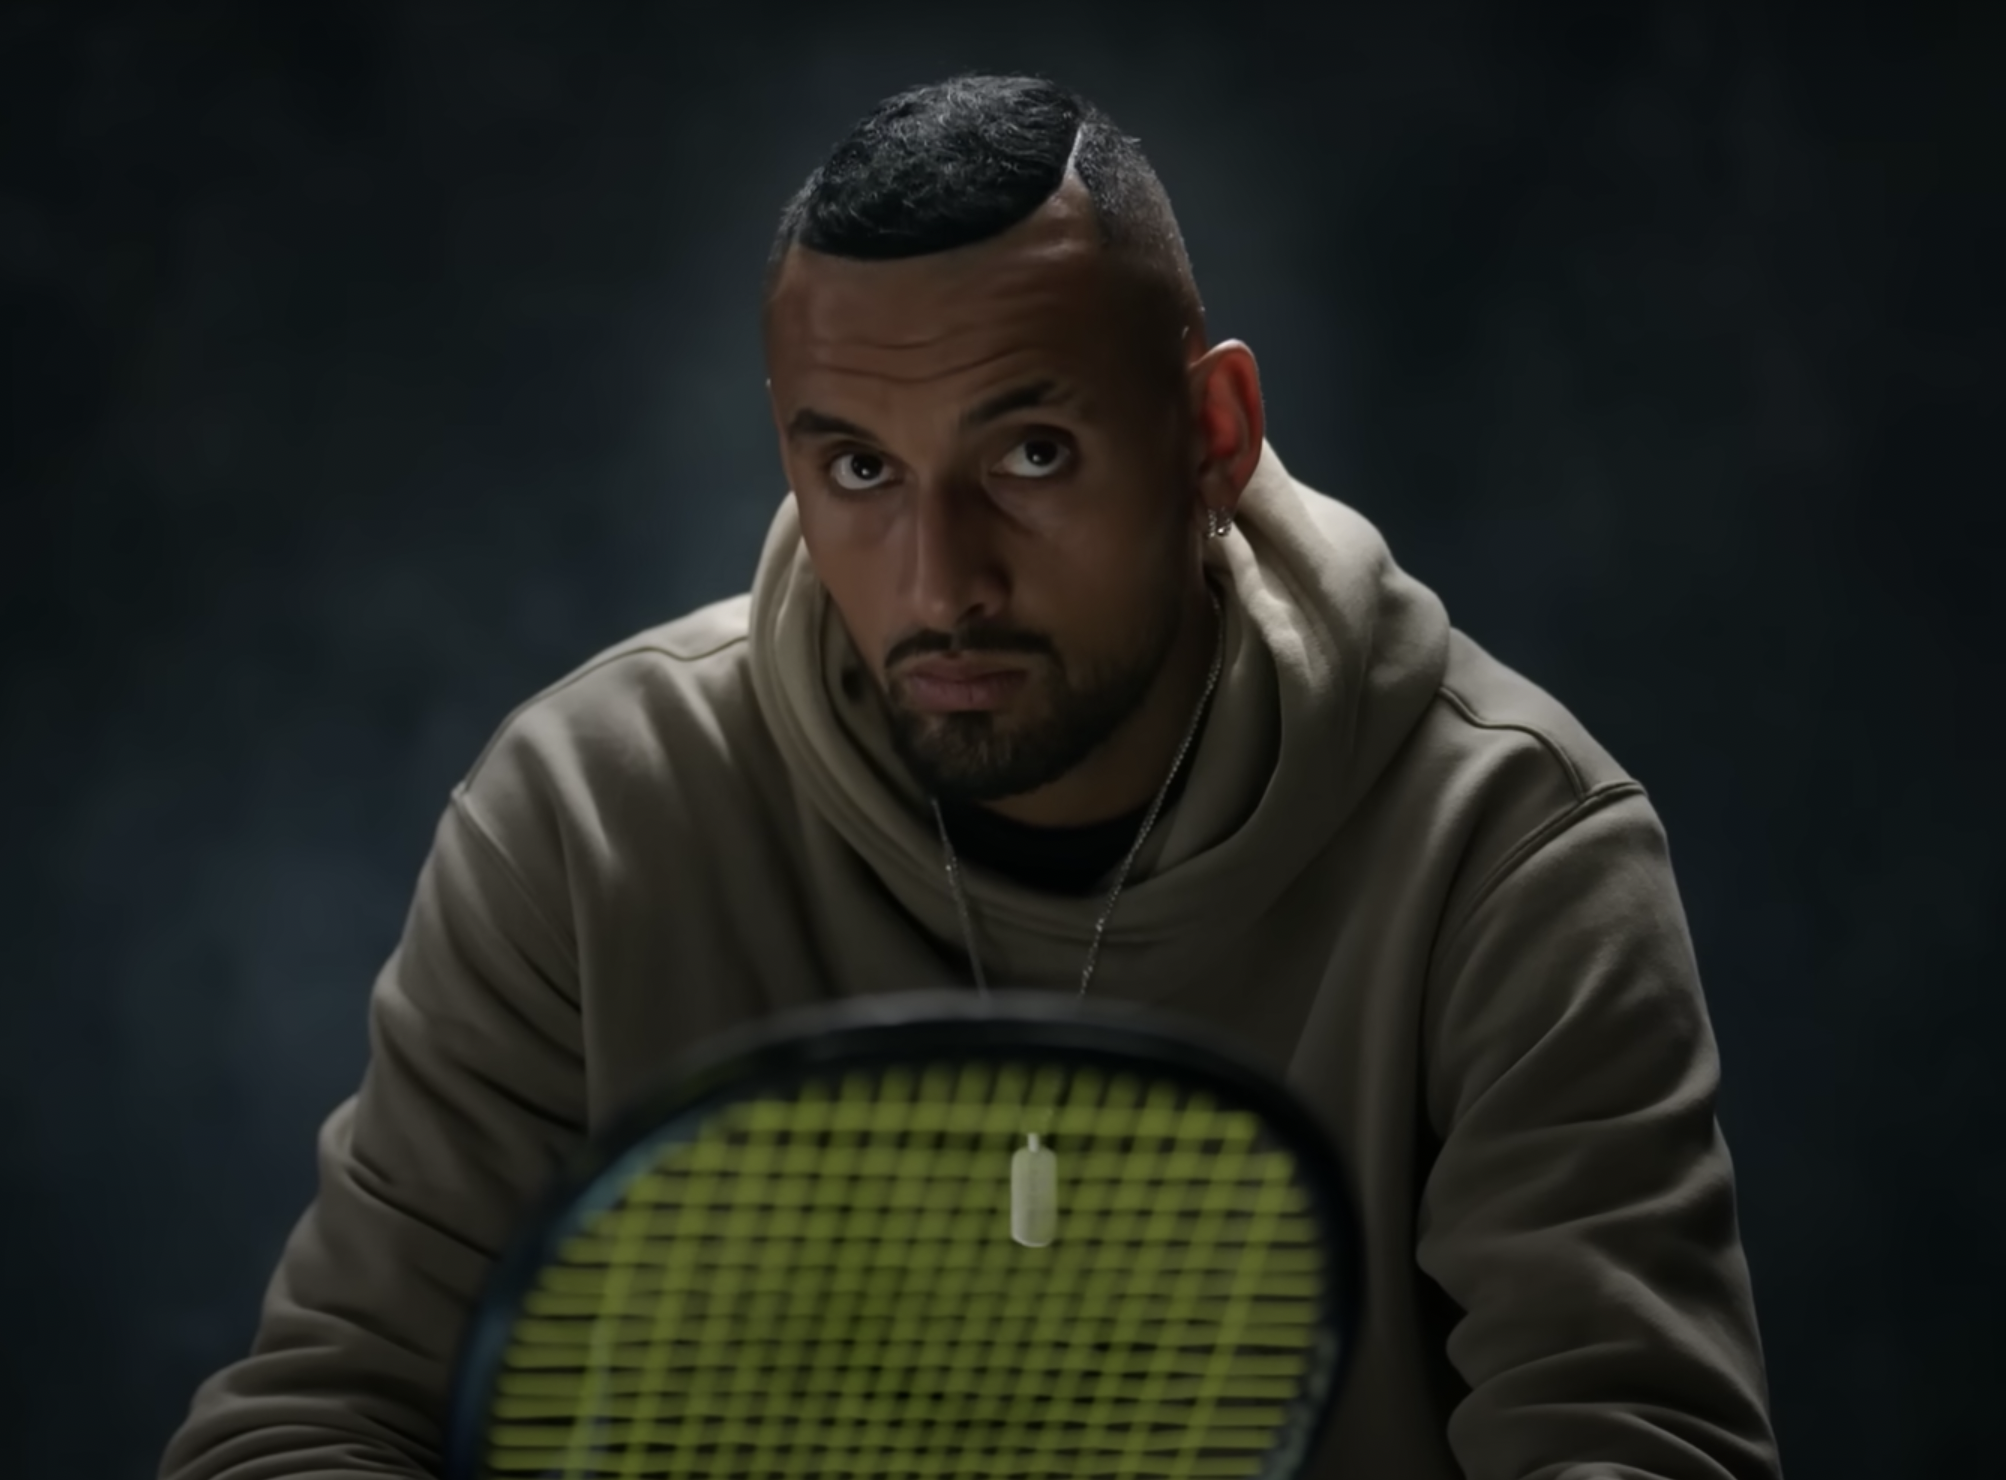 Netflix tennis documentary series Break Point: Premiere date, featured  storylines, players, and trailer